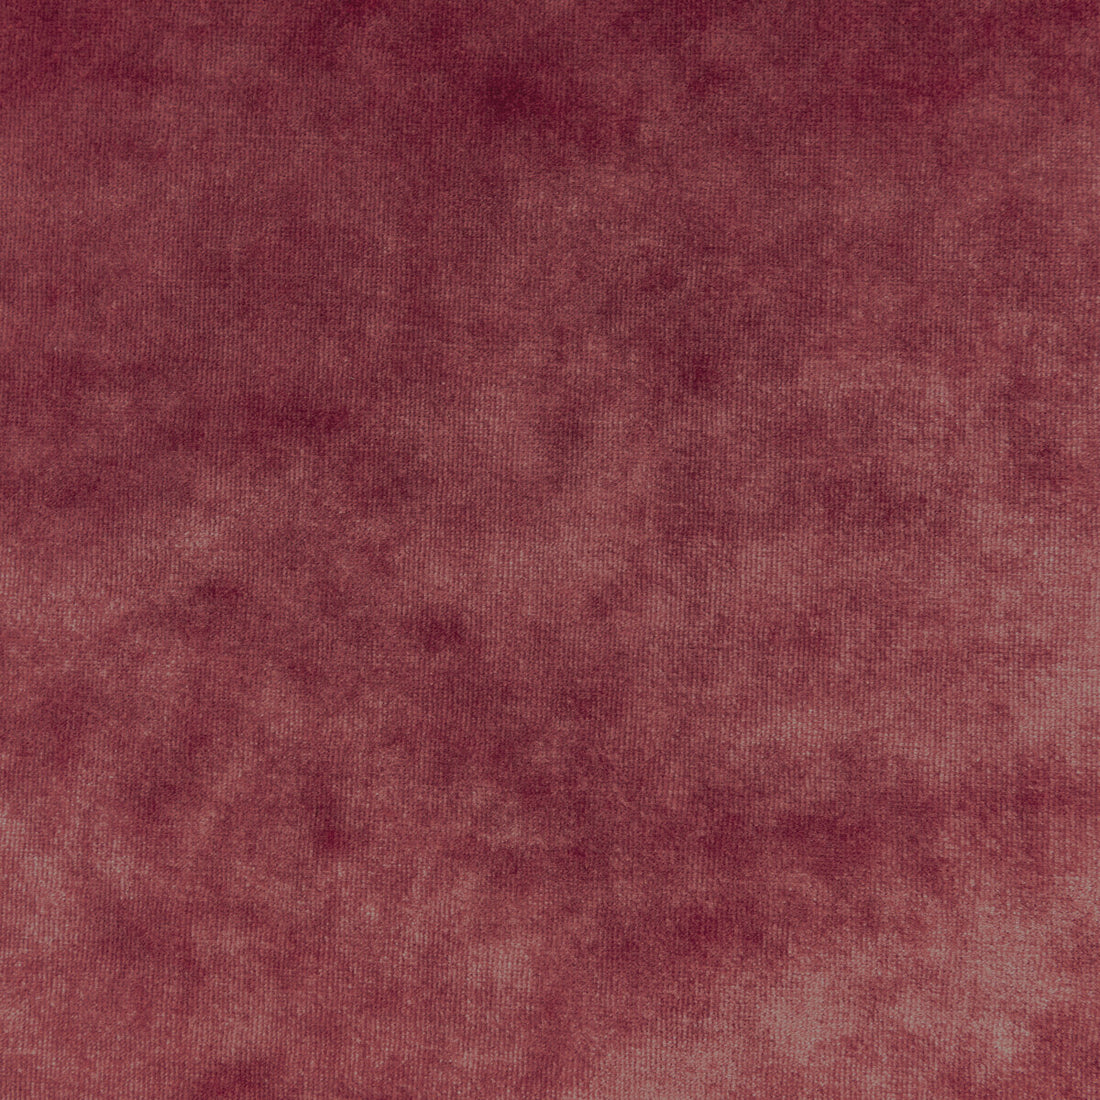 Regal Velvet fabric in rouge color - pattern 36064.7.0 - by Kravet Couture